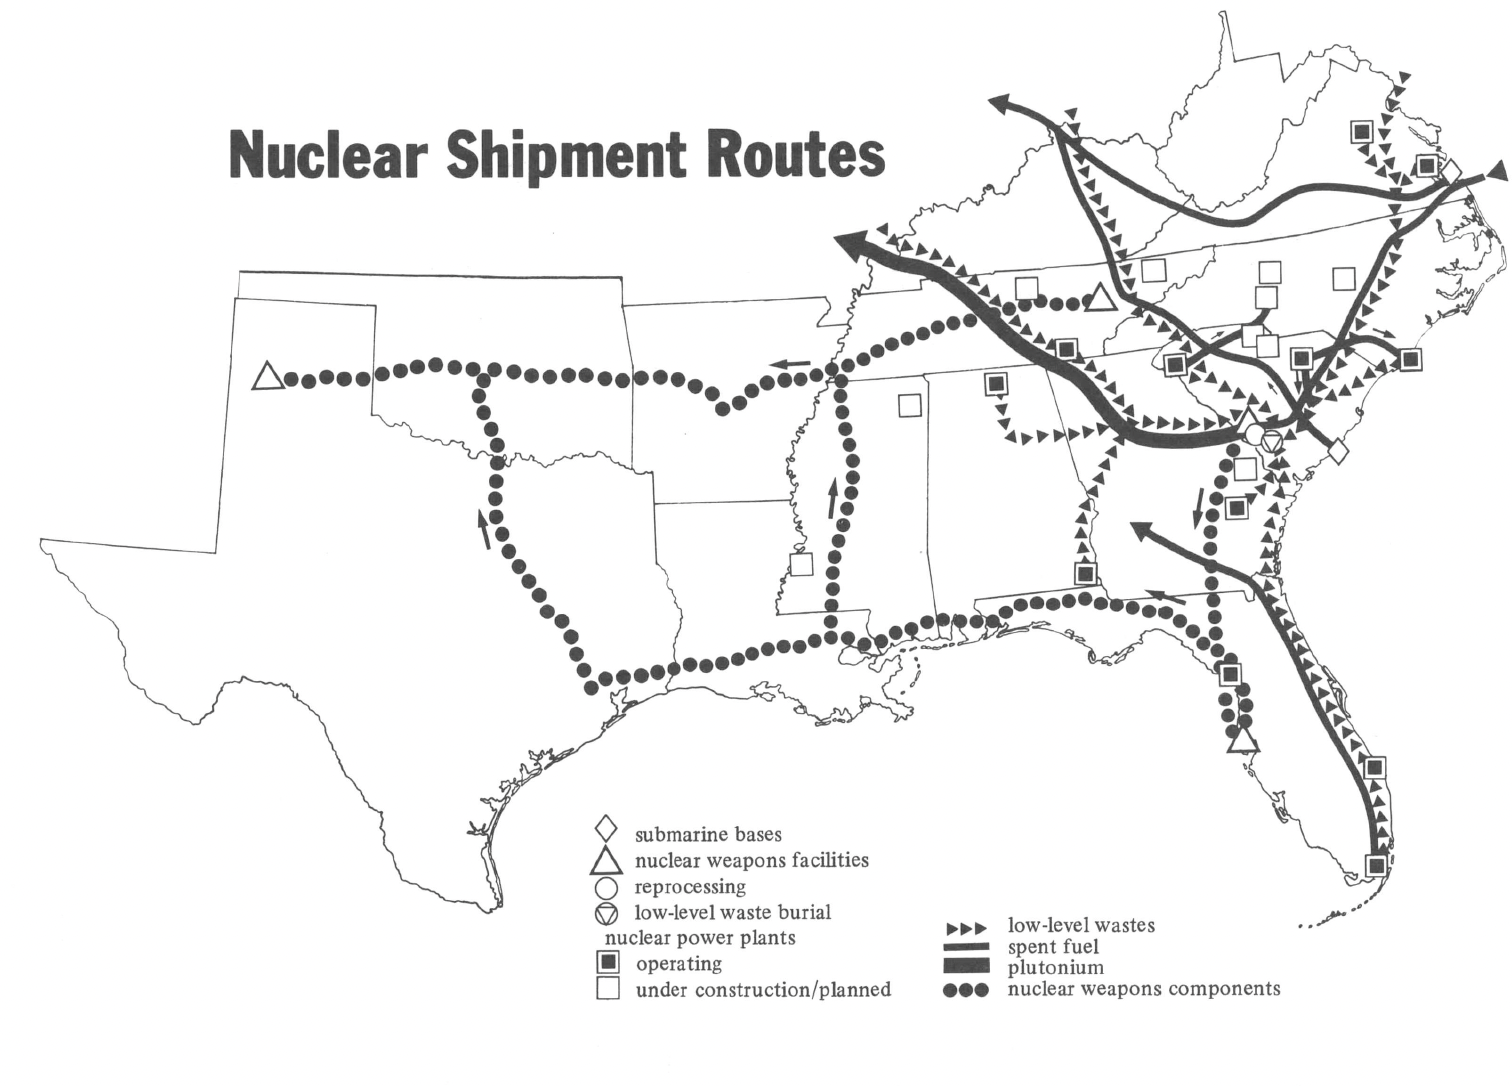 Map of Southern US labeled "Nuclear Shipment Routes"